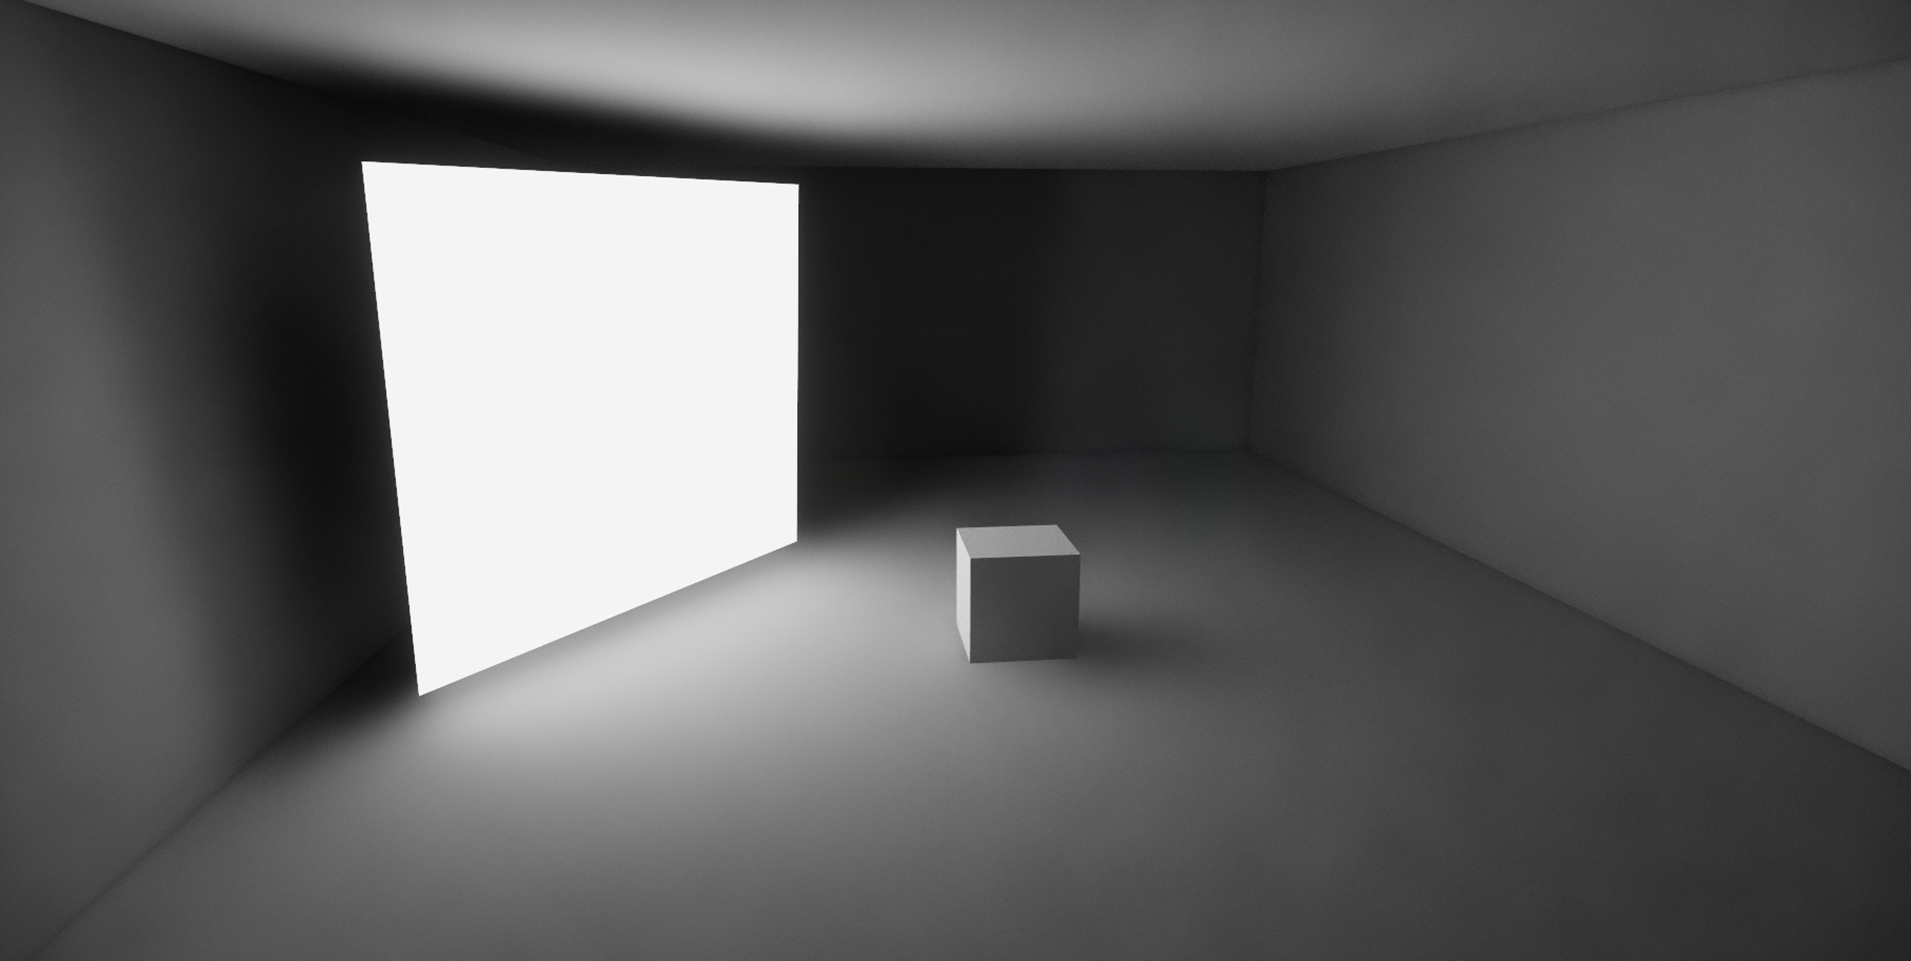 An emissive surface emitting white light and creating shadows